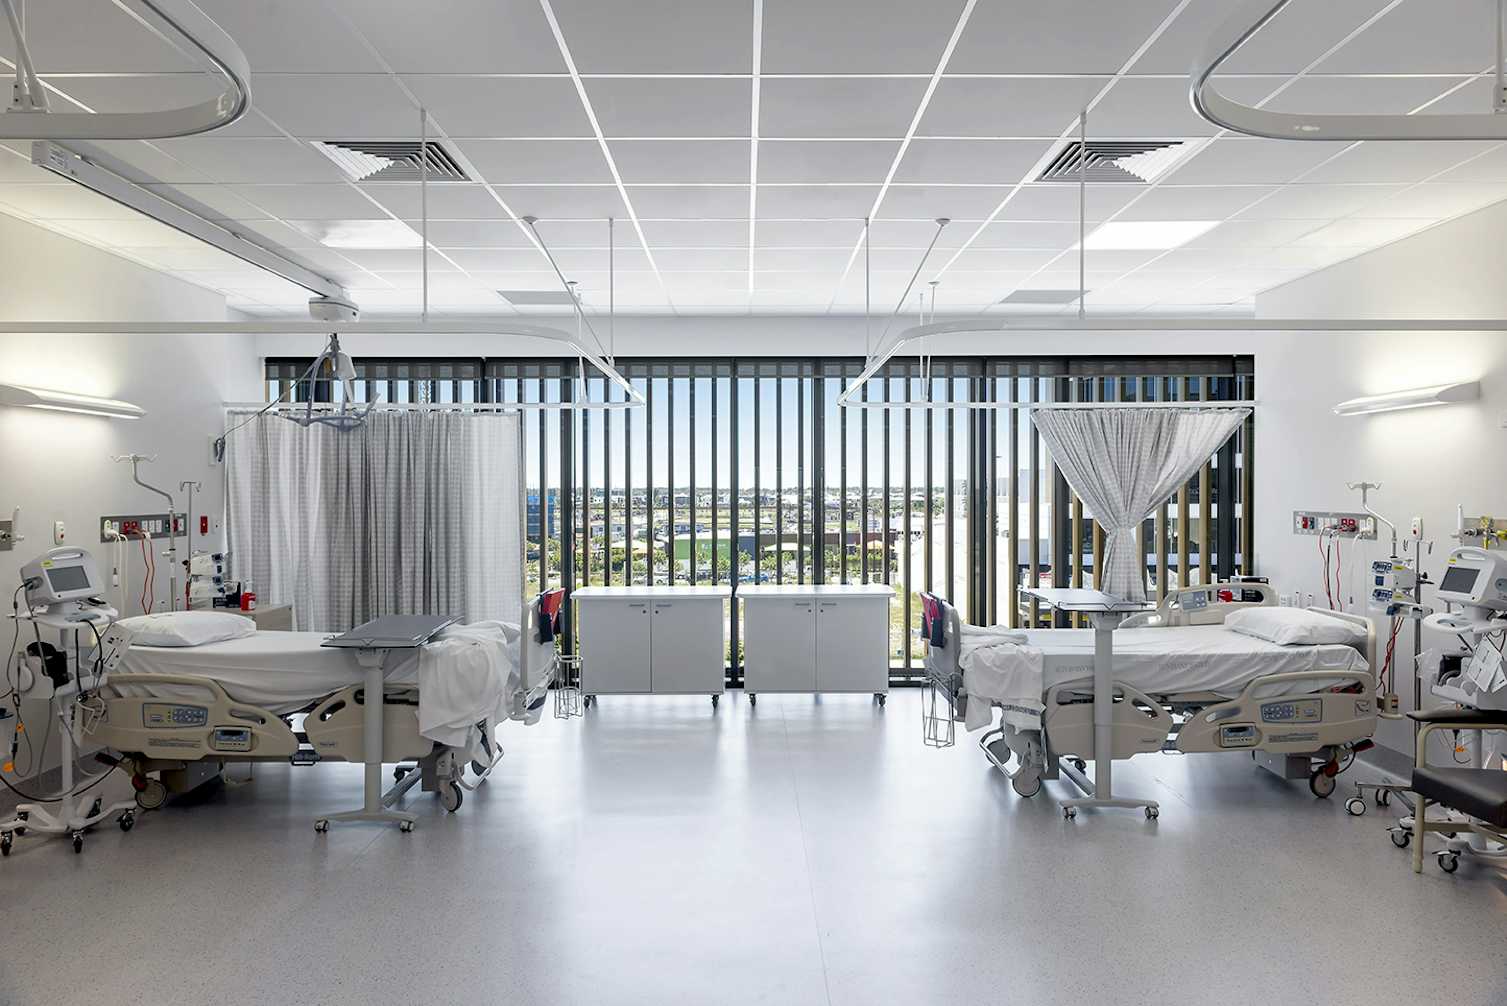 Making Space How Designing Hospitals For Indigenous People Might